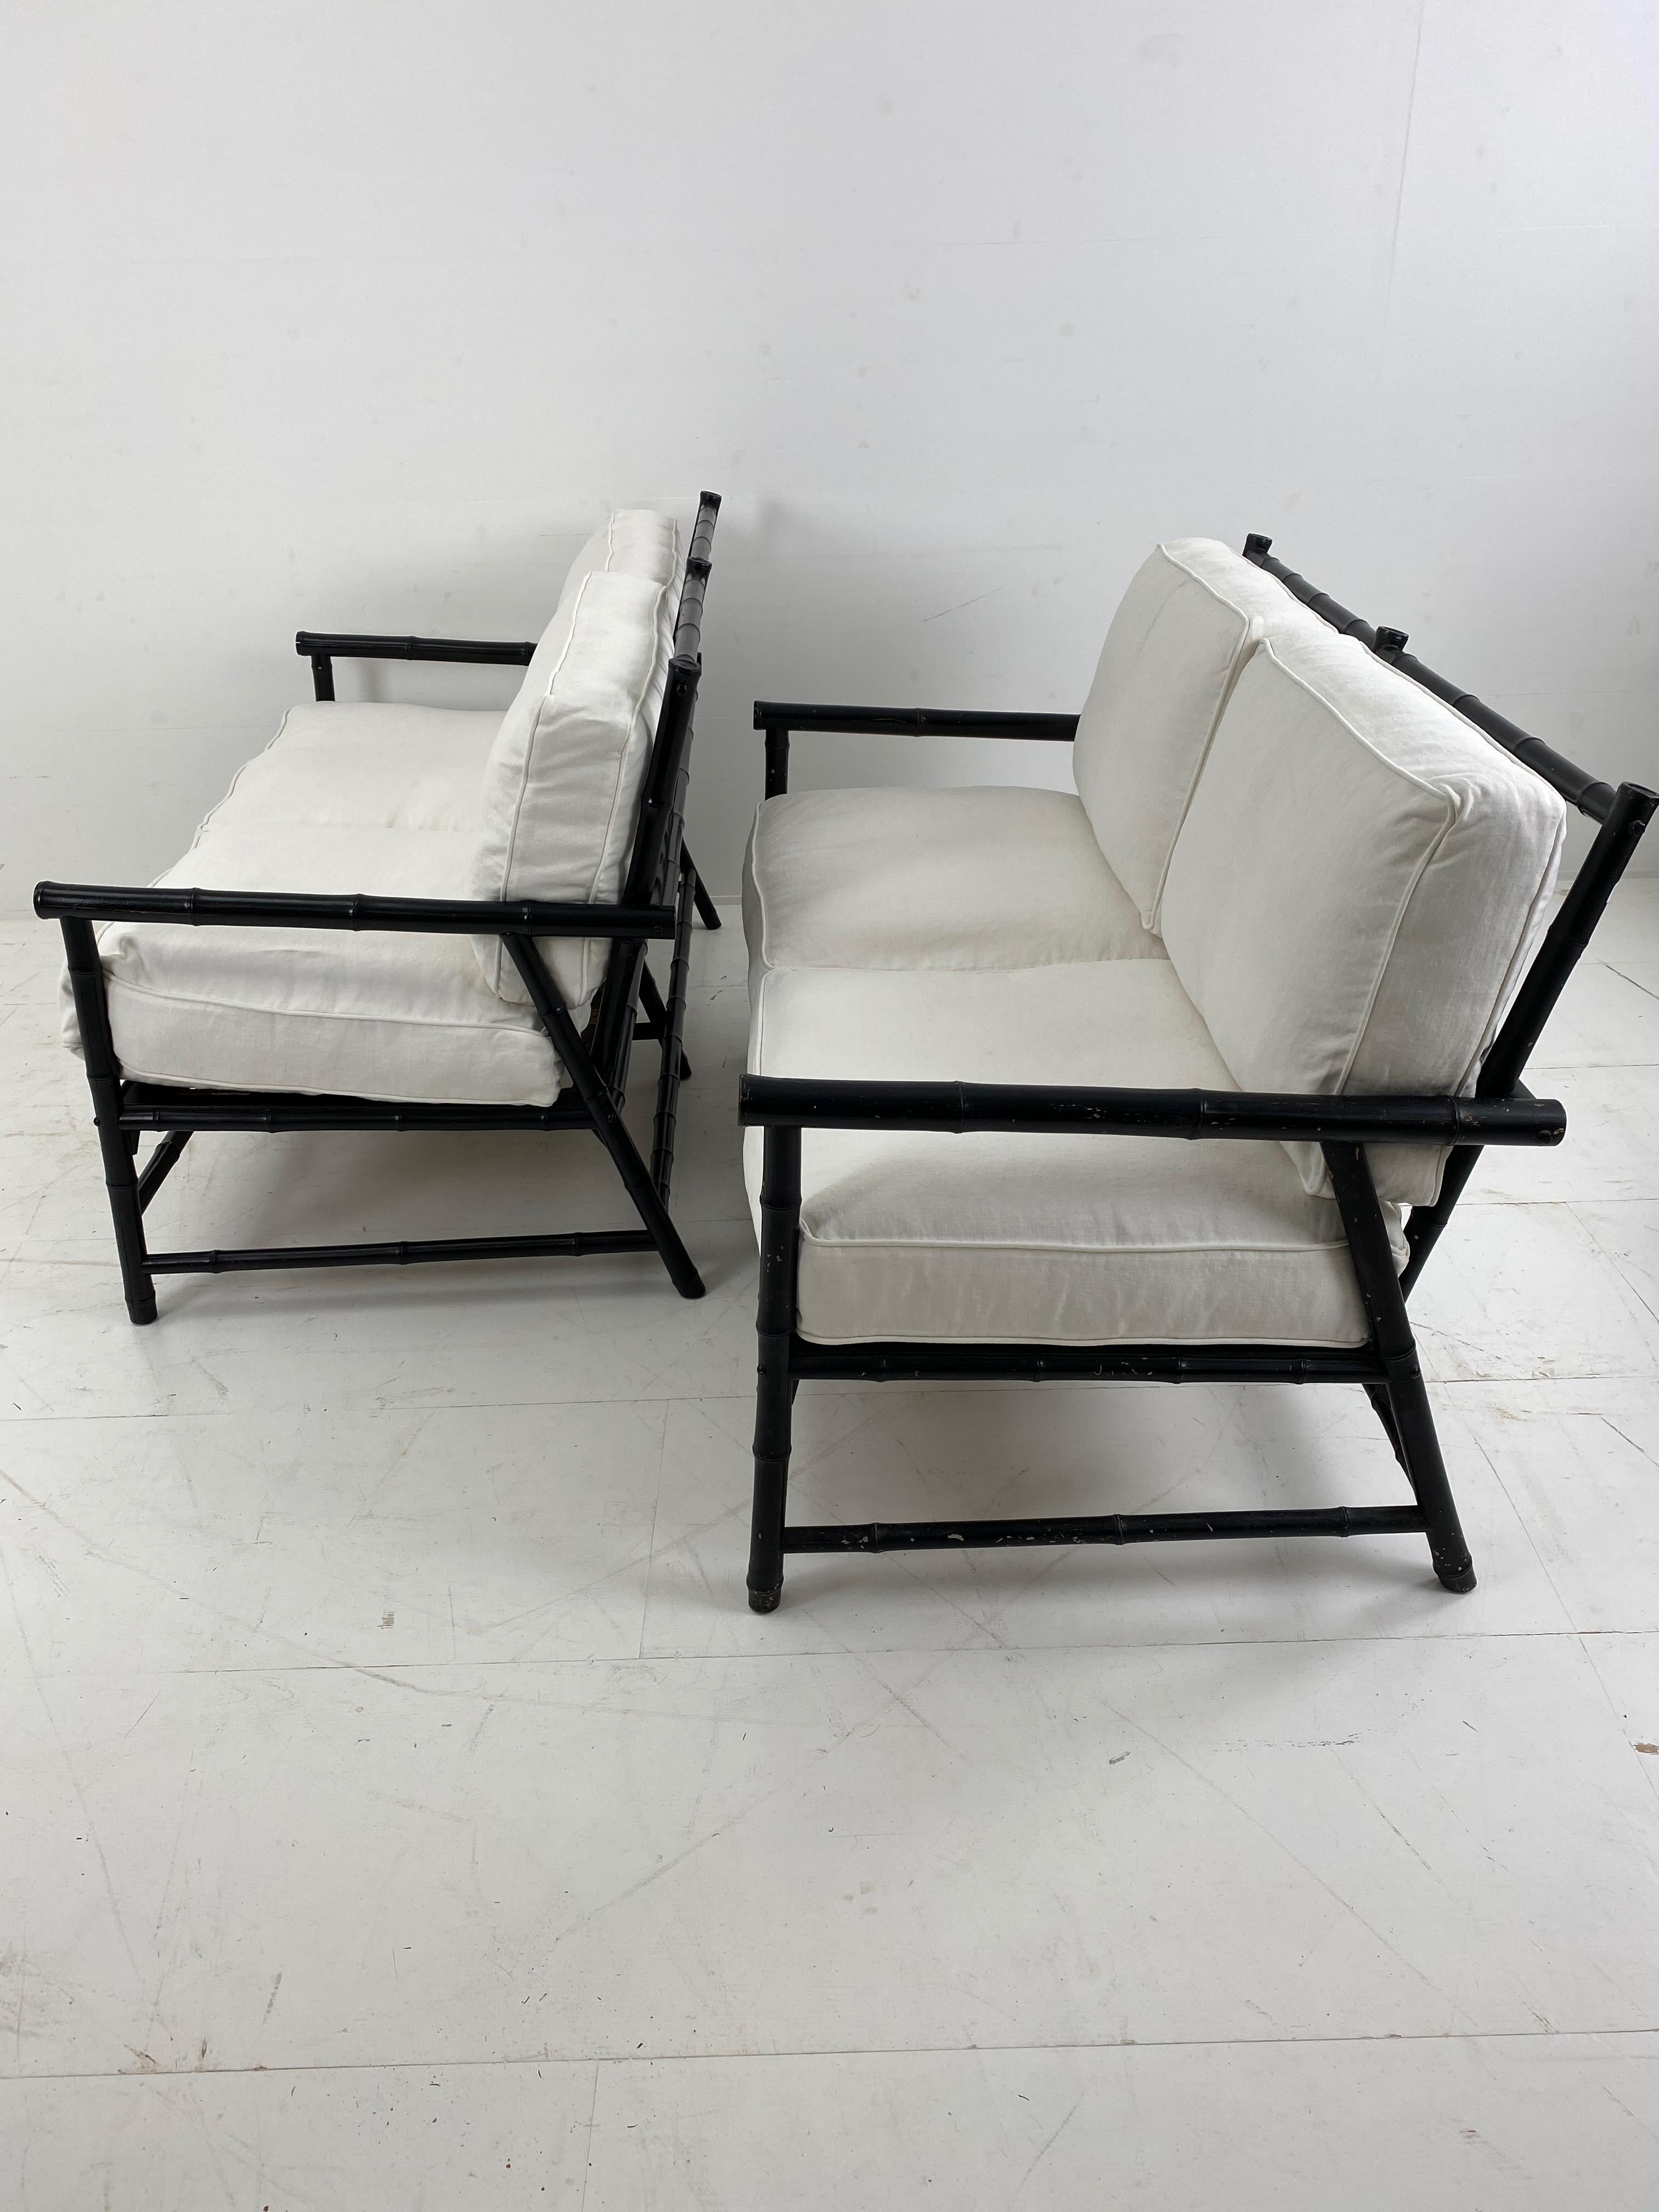 Exceptional Black Bamboo Settee pair, 2-seater,
new upholstered Cushions,very comfortable seating,
France, 1950s
Stamped Maurice Lauer, Cogolin, South Of France.
quality Vintage furniture